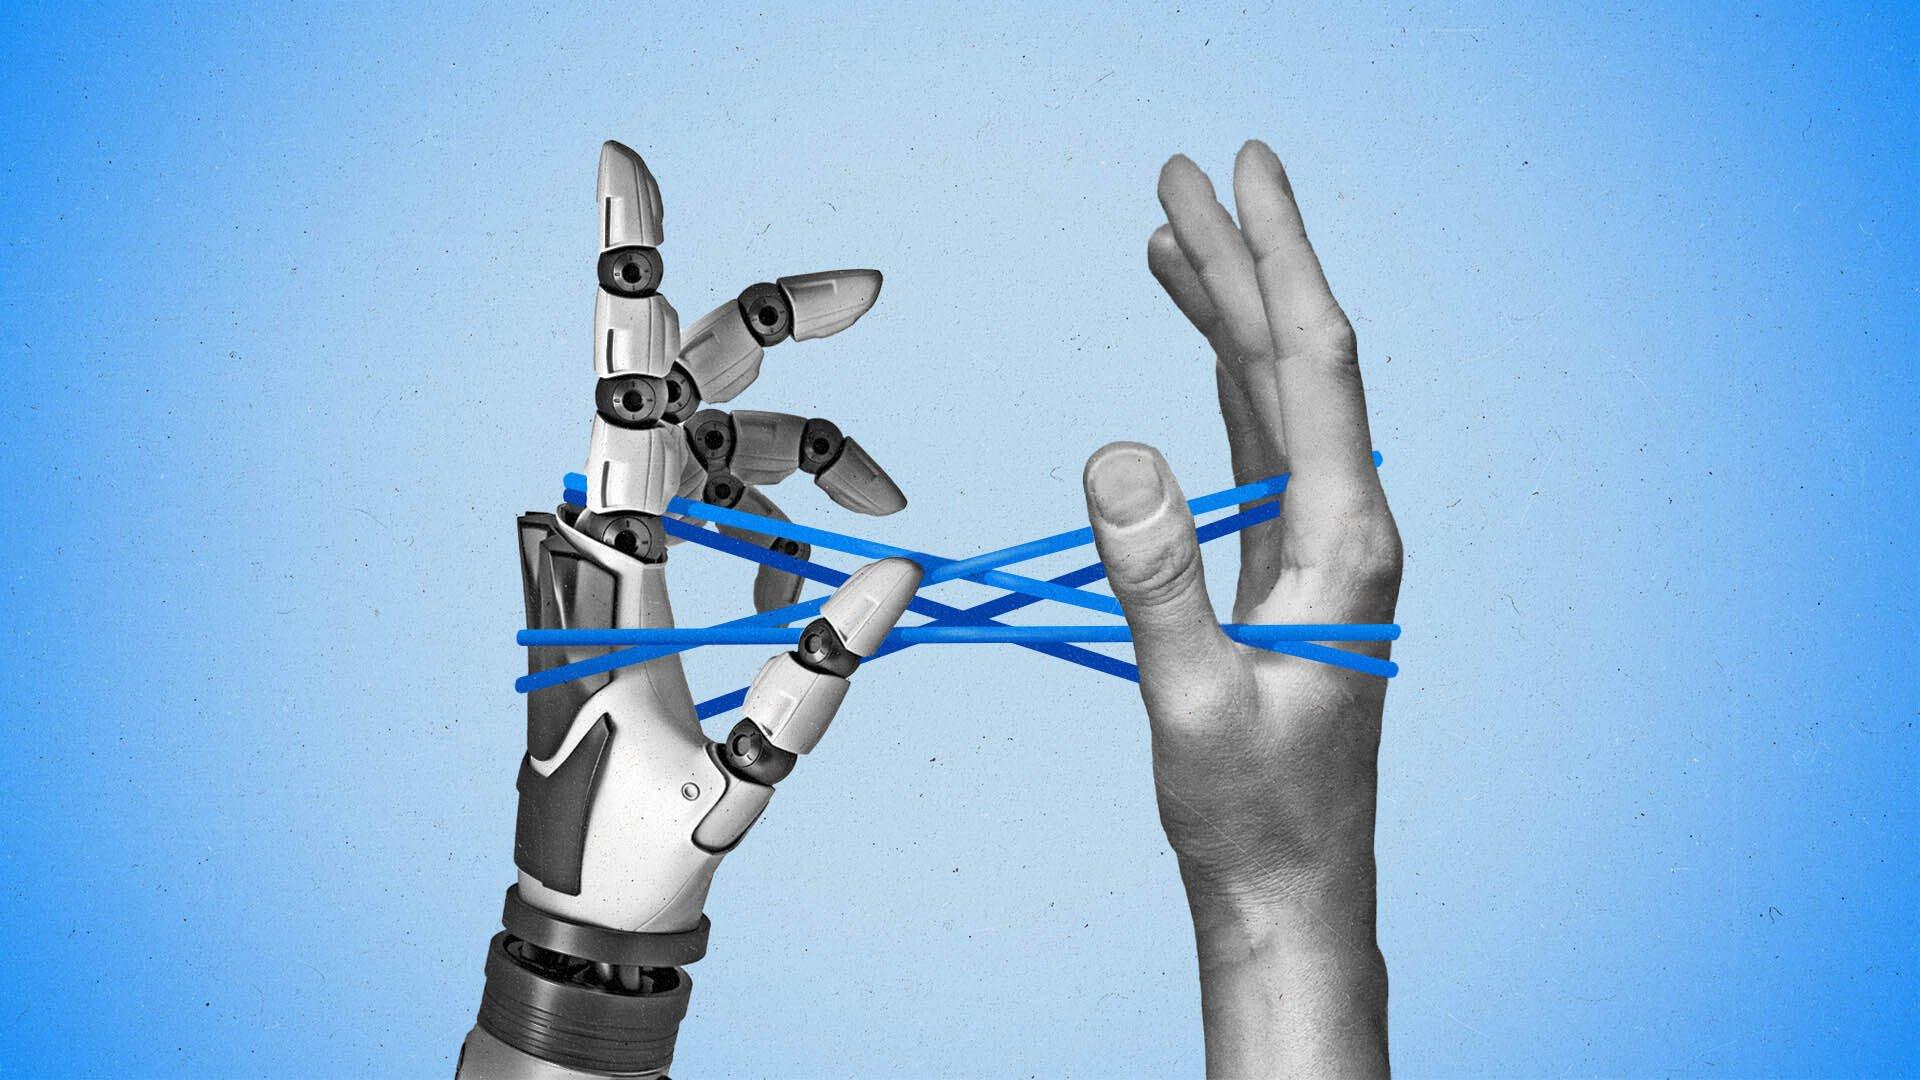 An artificial hand and a human hand play cat's cradle with a blue string